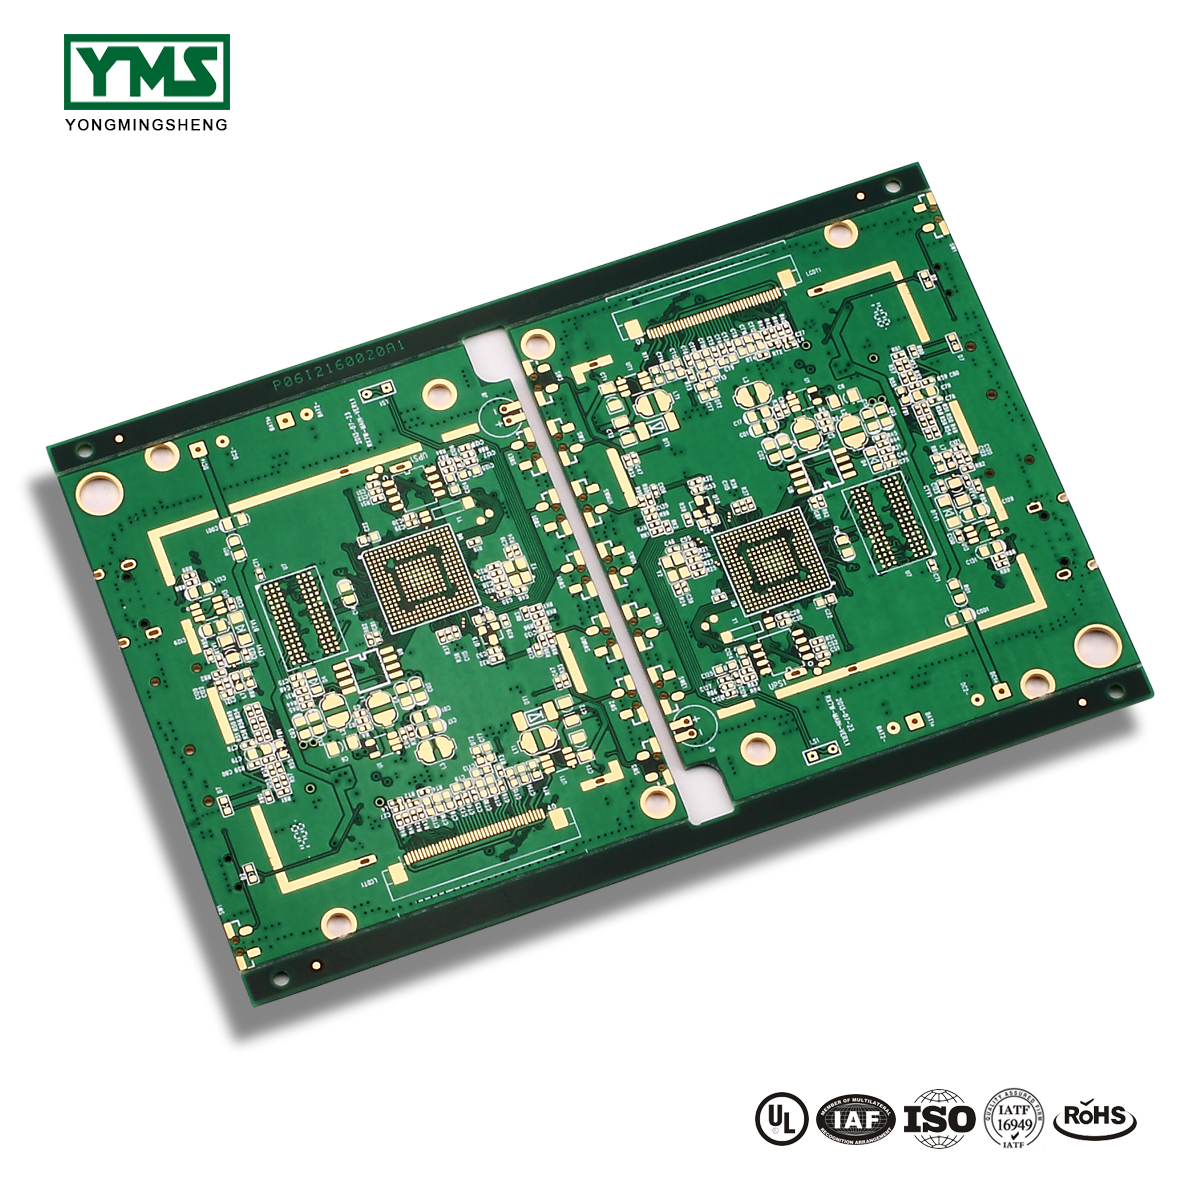 China Manufacturer for Small Printed Circuit Board - China Manufacturer for Customized Printing Circuit Board Design Pcb Design One-stop Service – Yongmingsheng